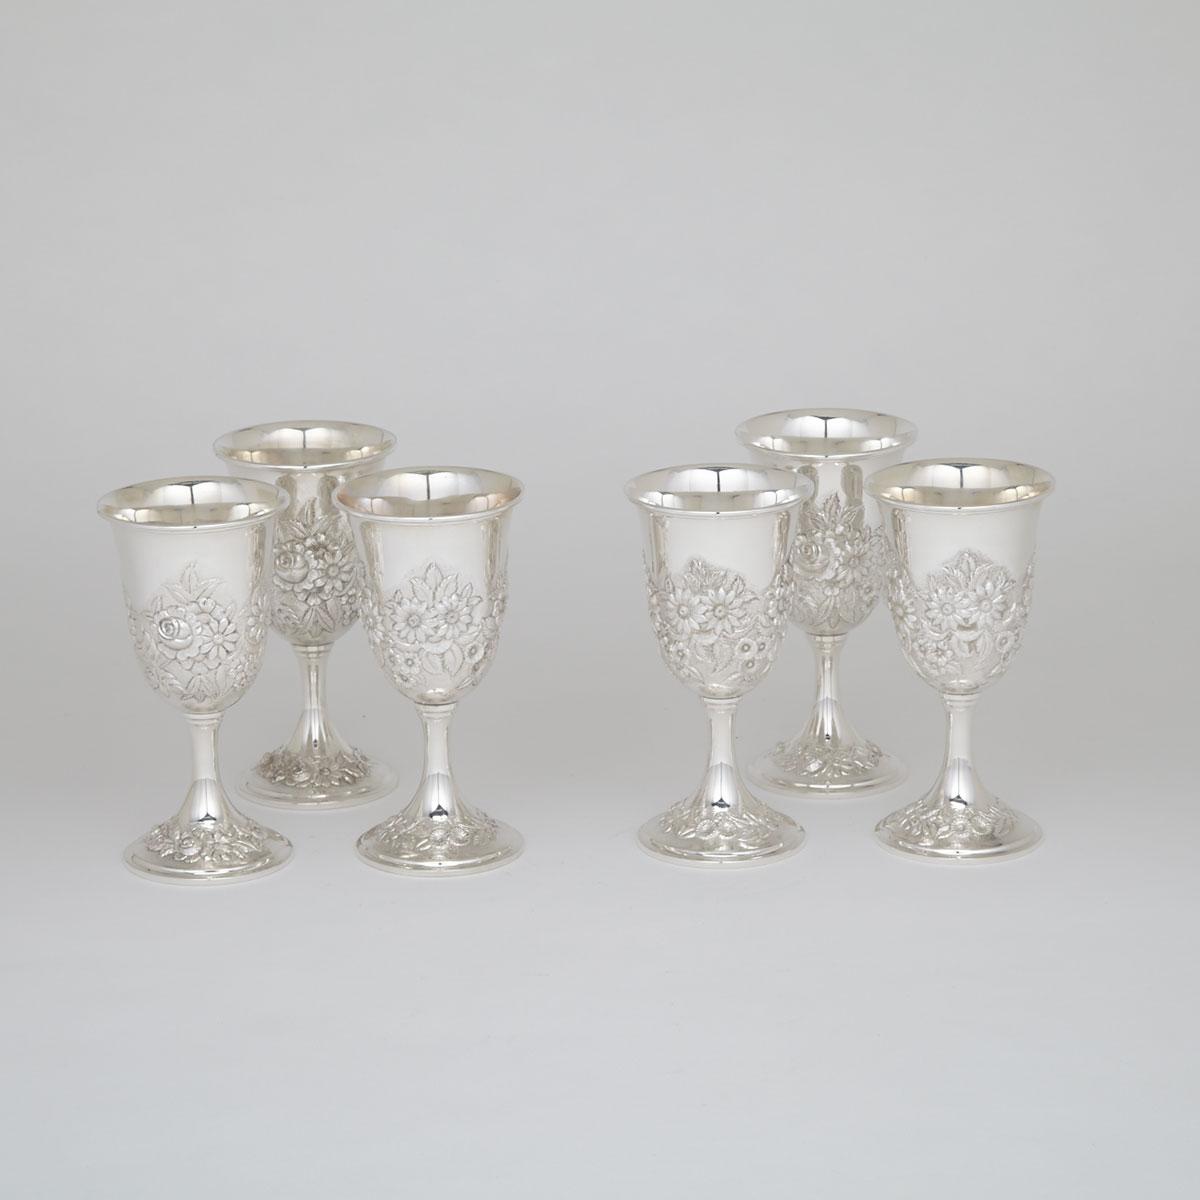 Six American Silver Goblets, S. Kirk & Son, Baltimore, Md., mid-20th Century